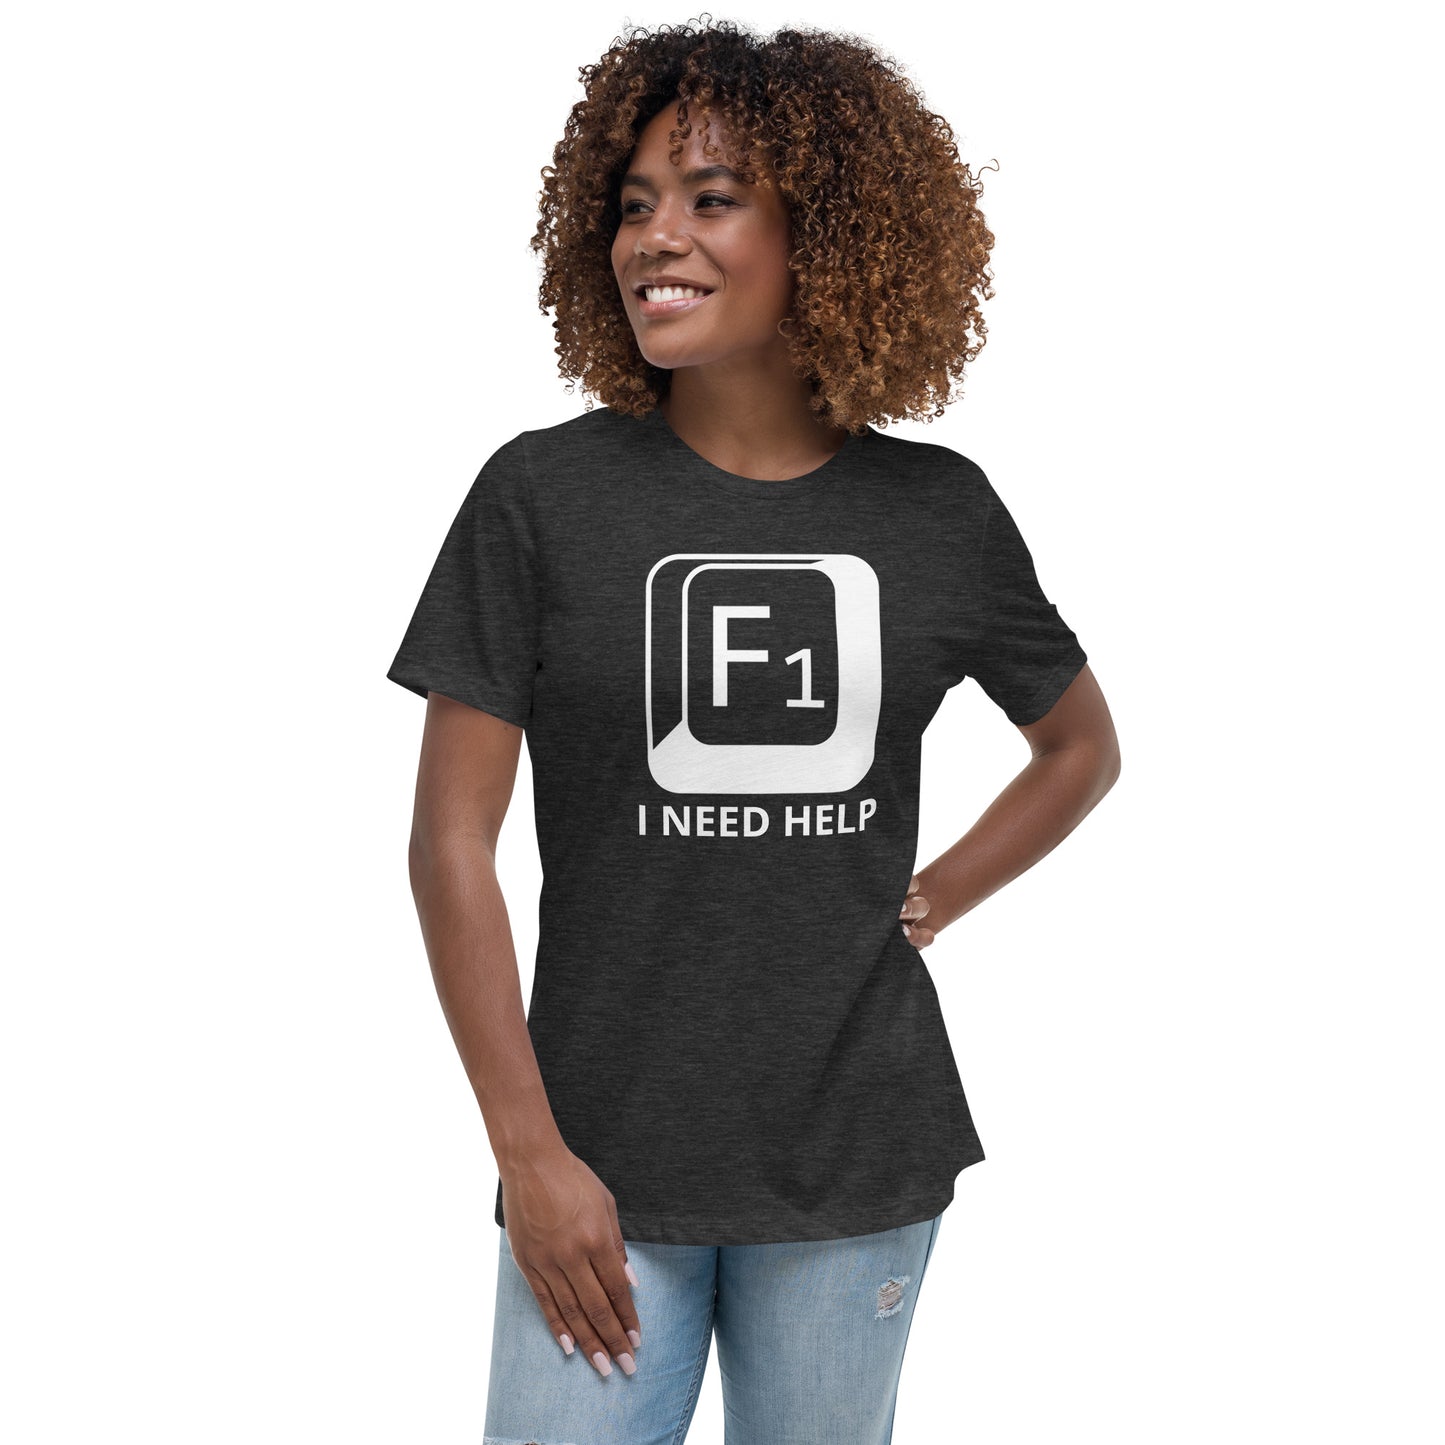 Woman with dark grey t-shirt with picture of "F1" key and text "I need help"